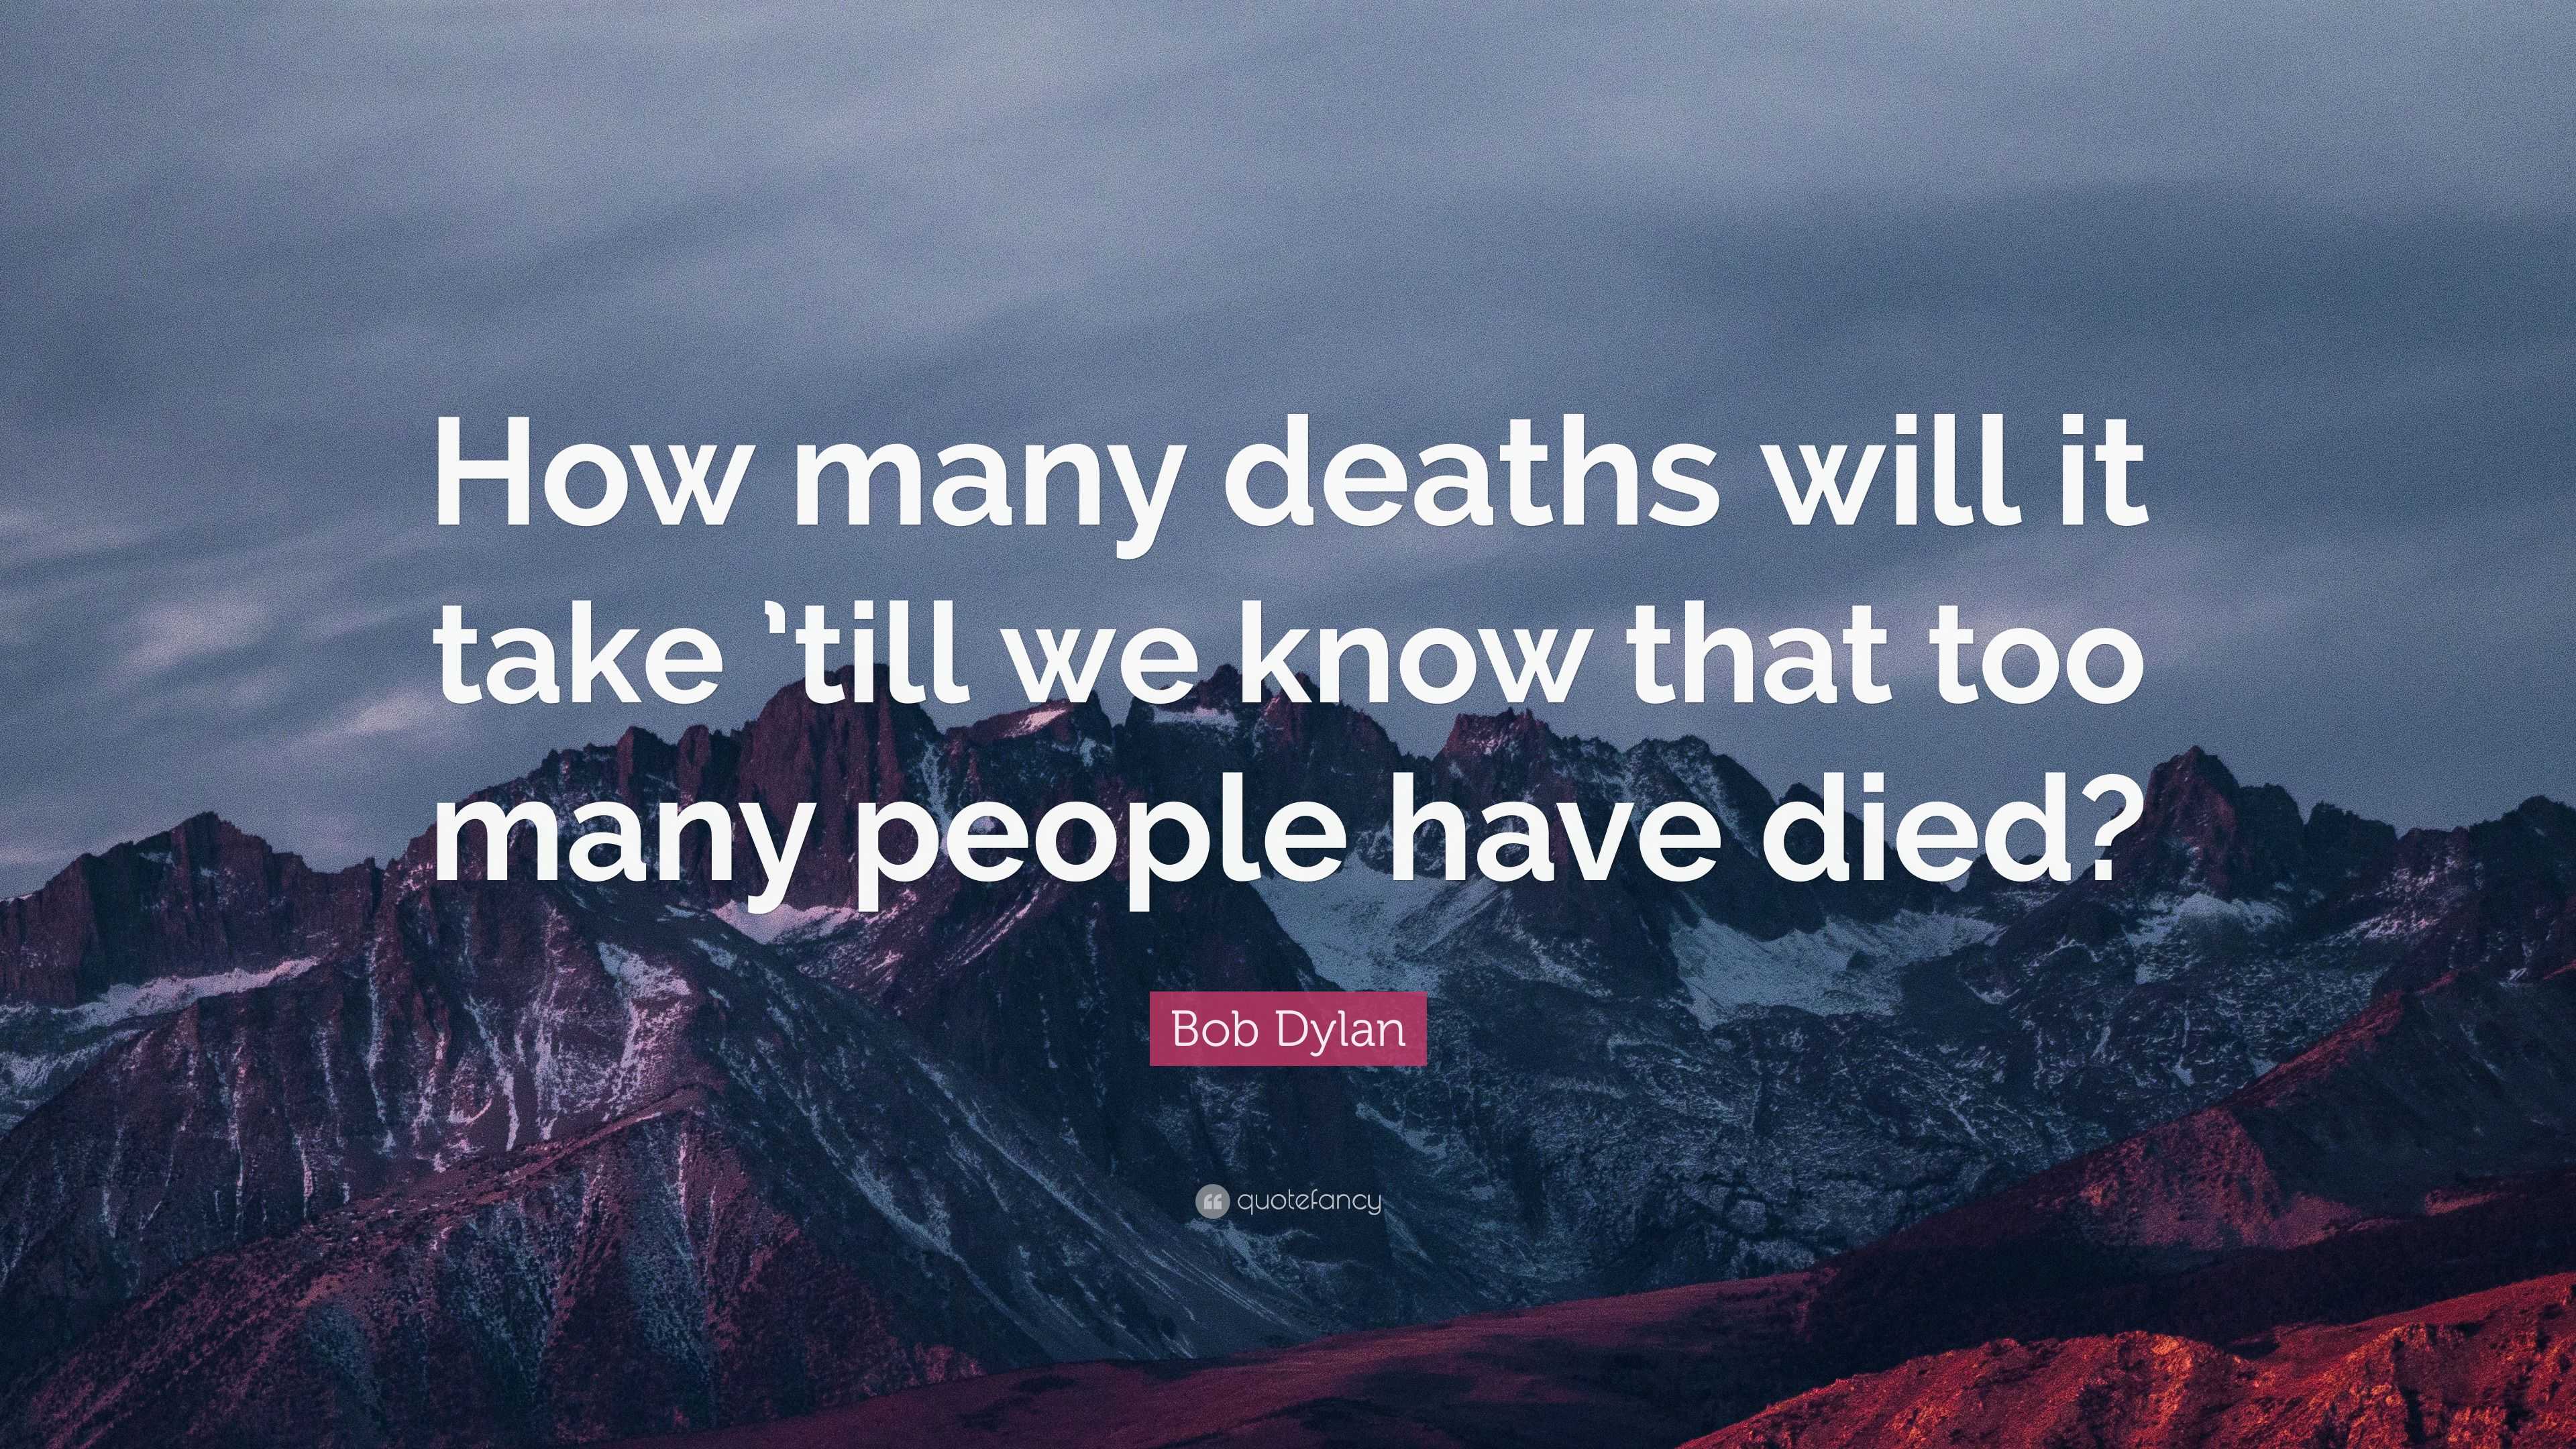 Bob Dylan Quote: “How many deaths will it take ’till we know that too ...